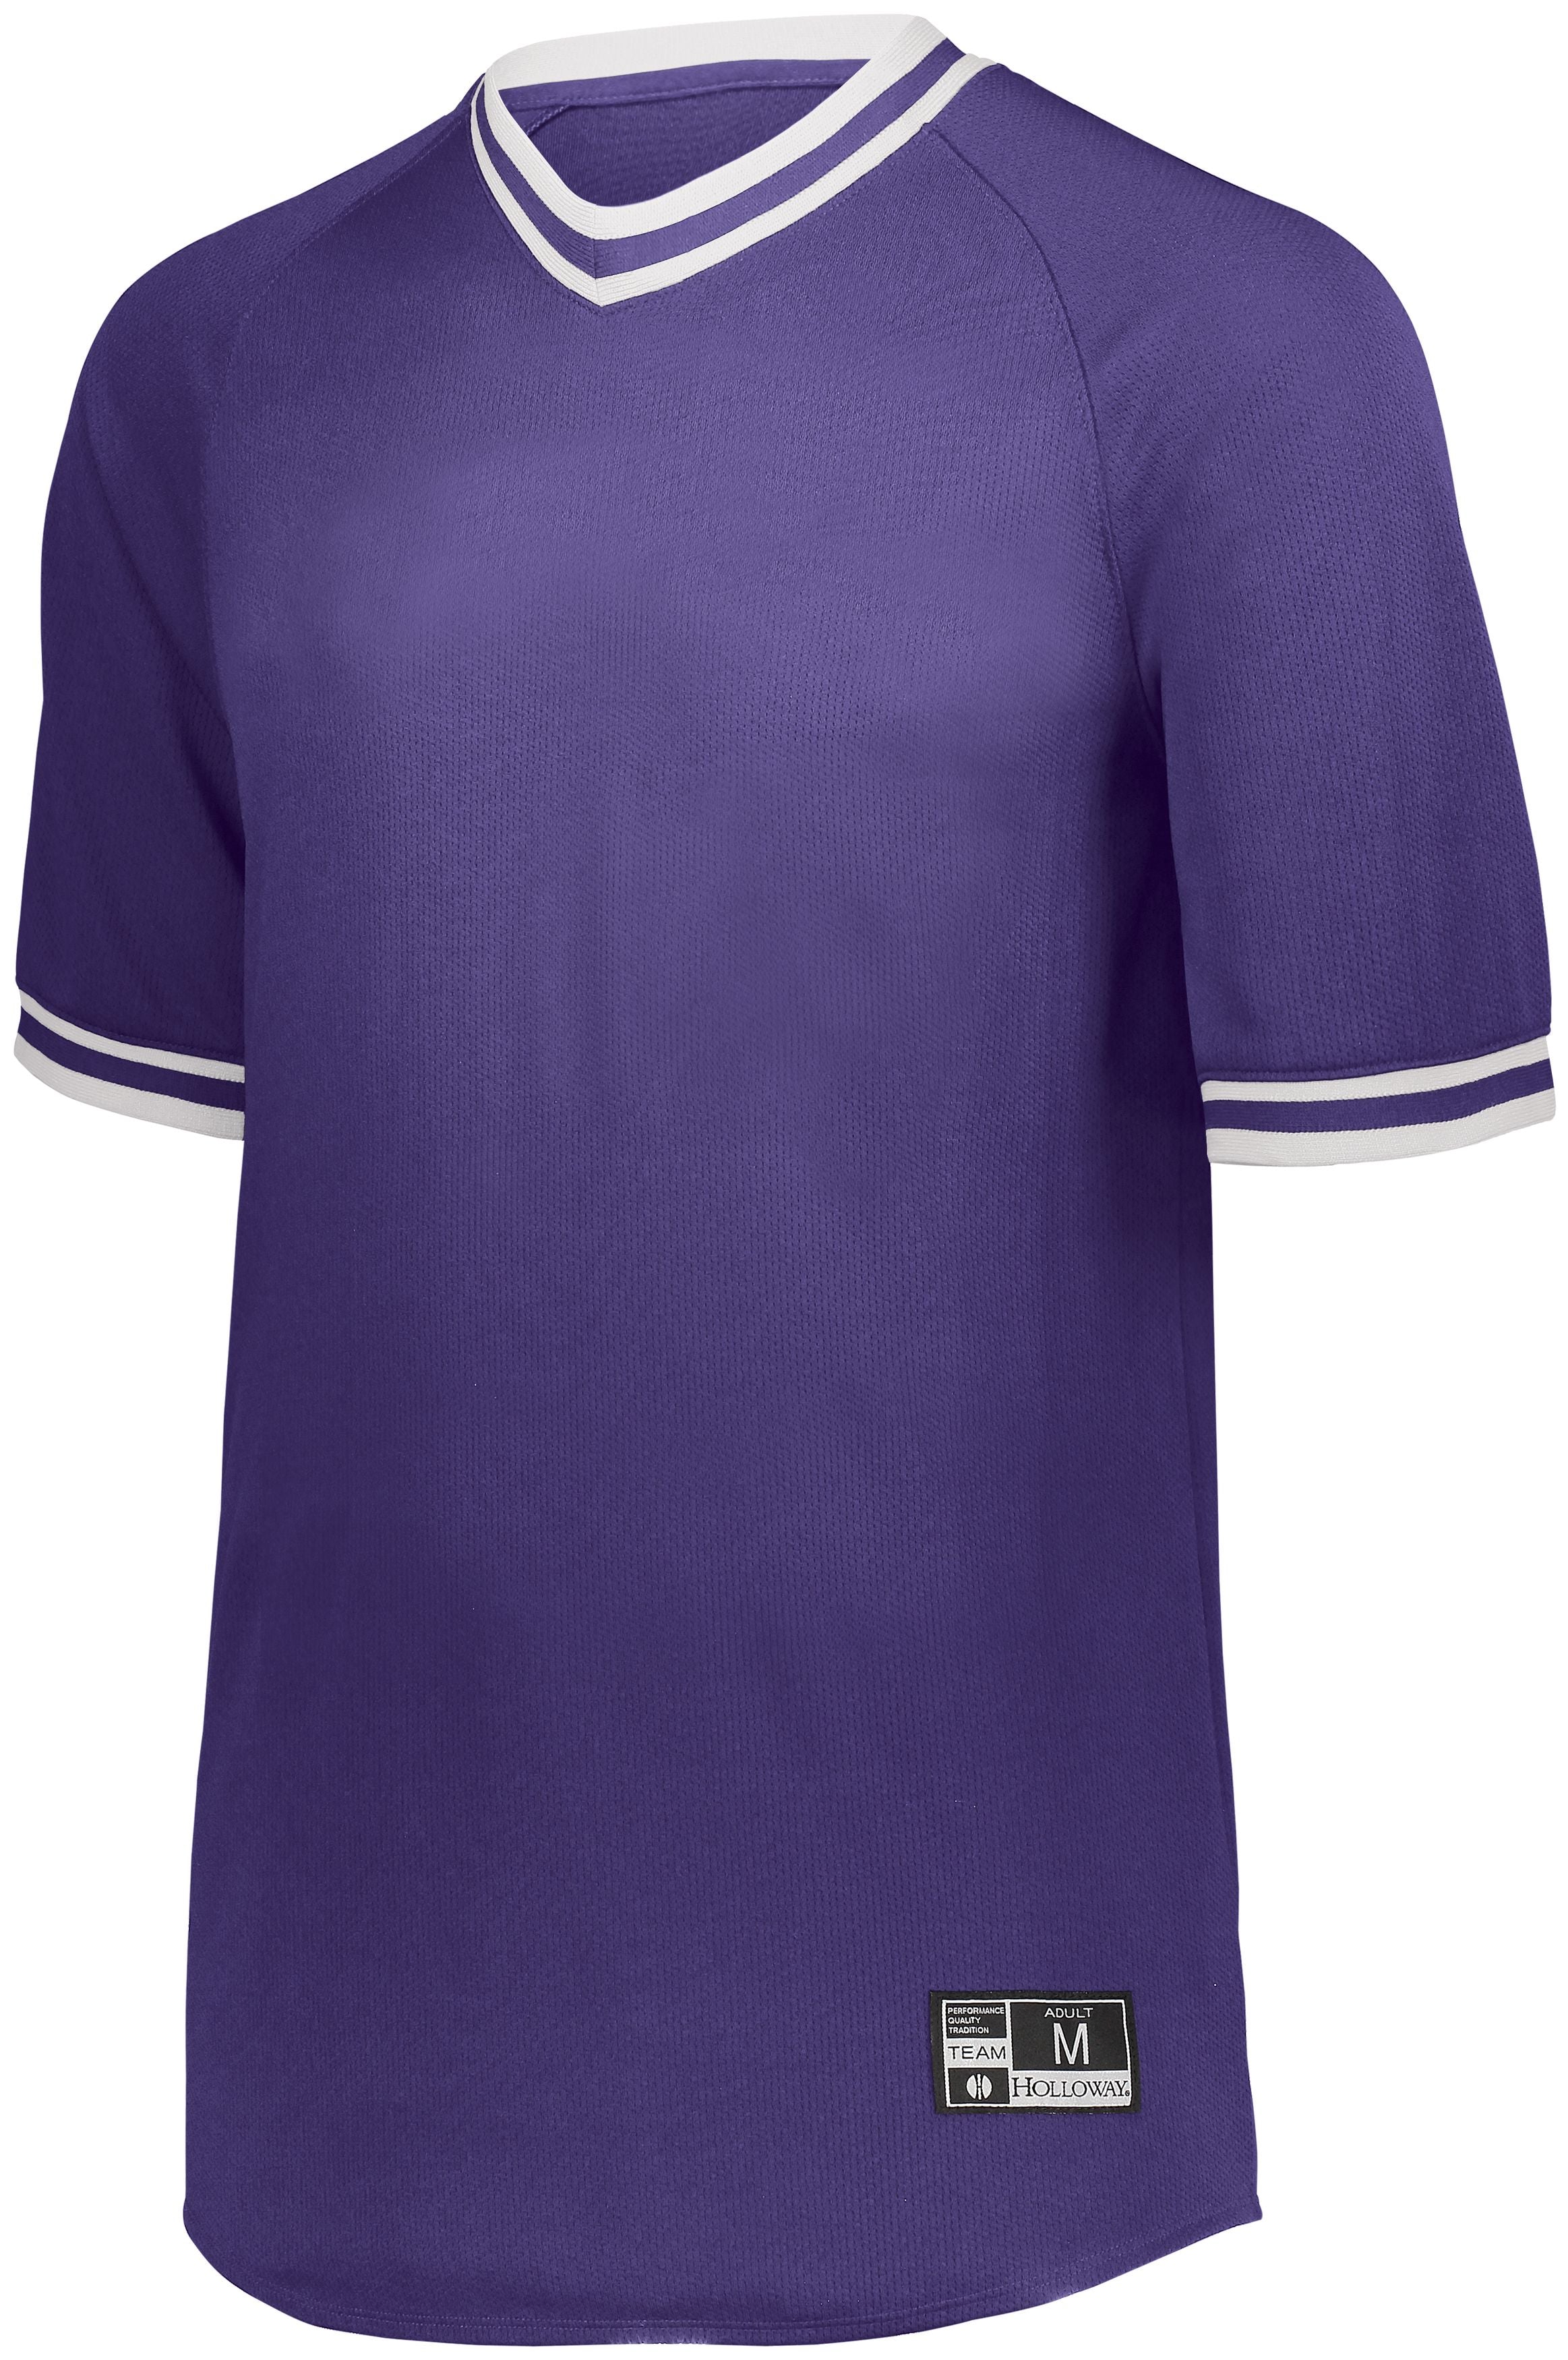 Holloway Retro V-Neck Baseball Jersey in Purple/White  -Part of the Adult, Adult-Jersey, Baseball, Holloway, Shirts, All-Sports, All-Sports-1 product lines at KanaleyCreations.com